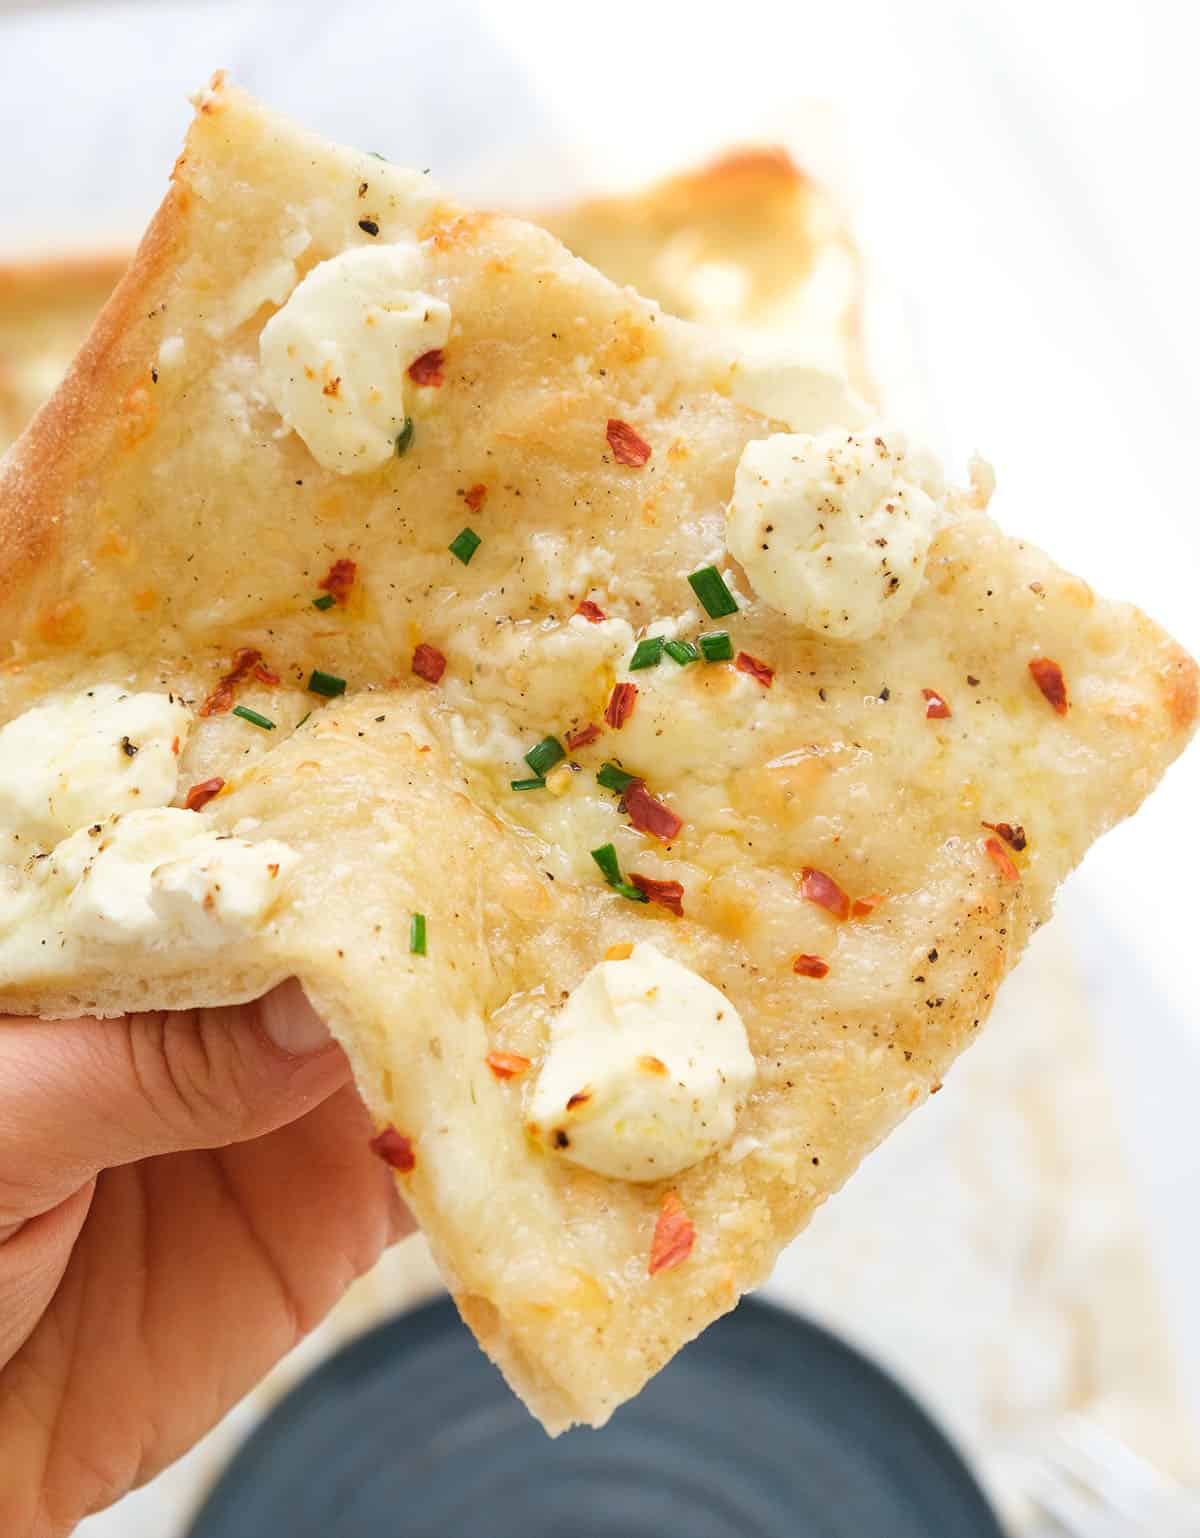 A slice of cream cheese pizza with chili flakes showing its soft, creamy texture.